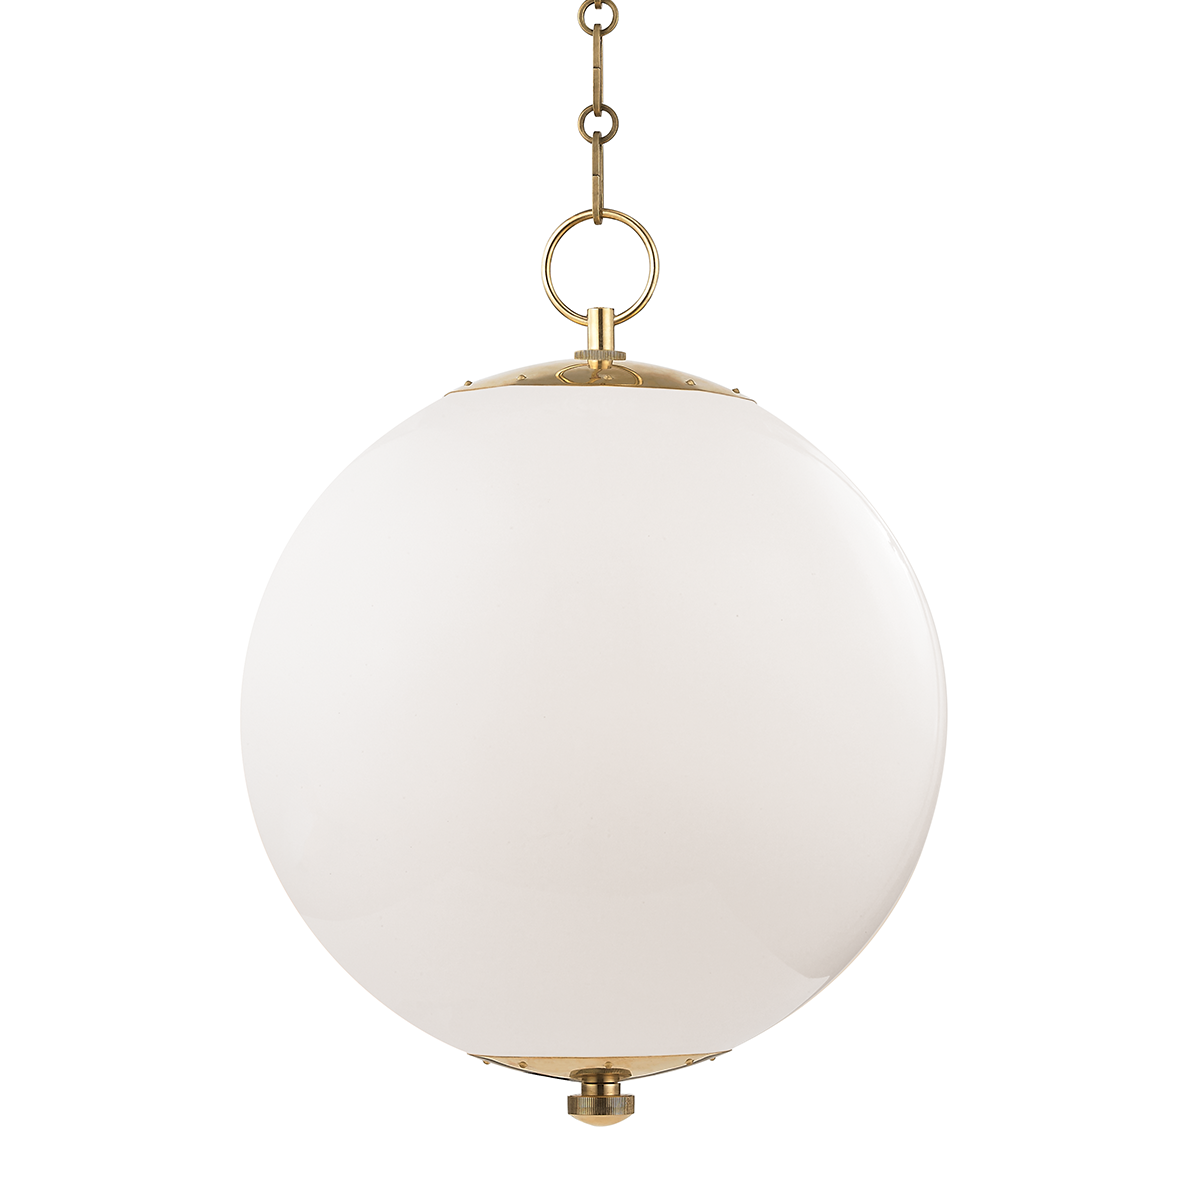 Steel with Opal Glass Globe Shade Pendant